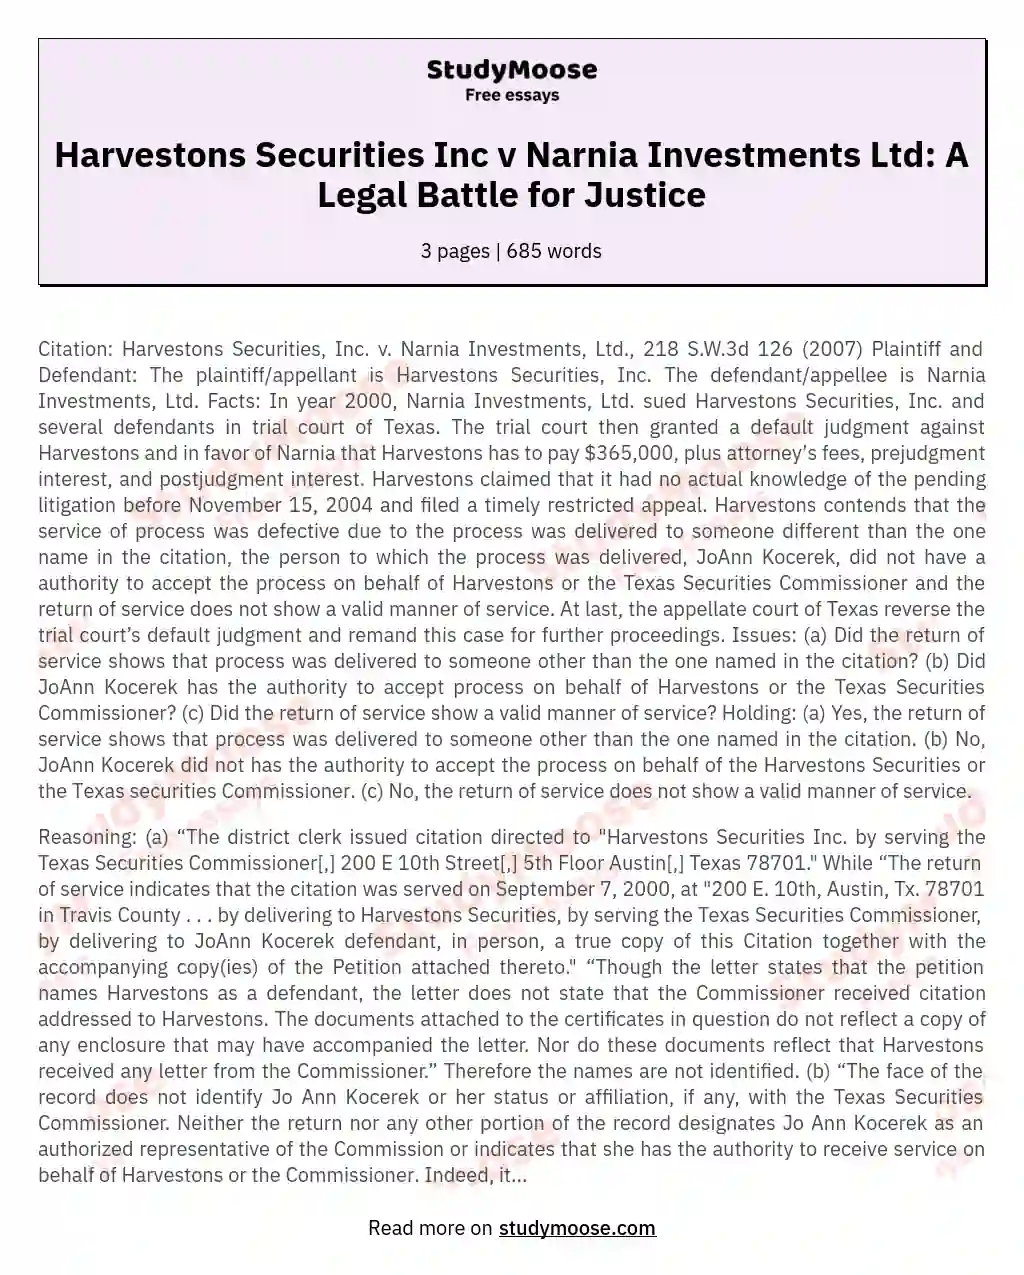 Harvestons Securities Inc v Narnia Investments Ltd: A Legal Battle for Justice essay